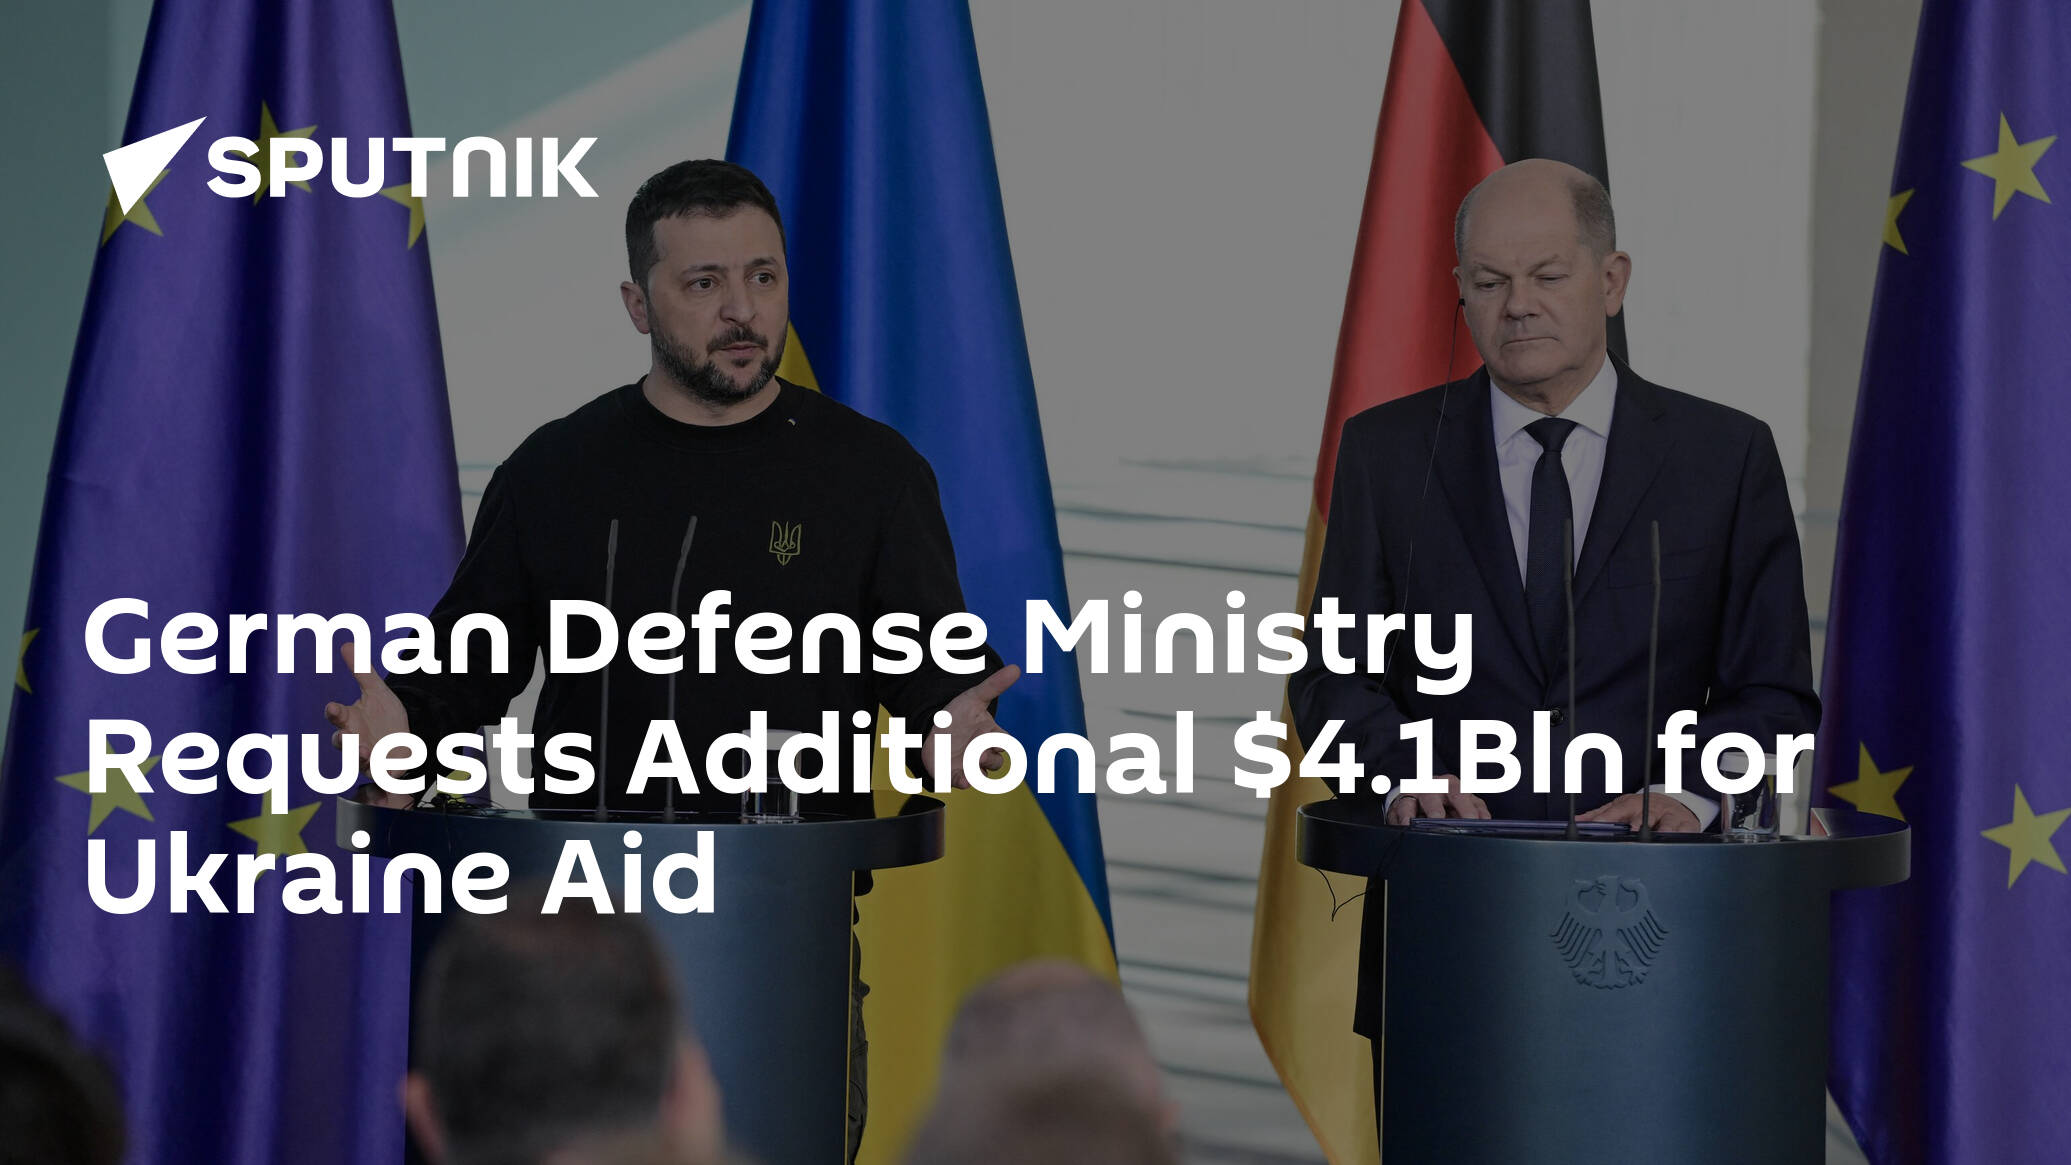 German Defense Ministry Requests Additional .1Bln for Ukraine Aid